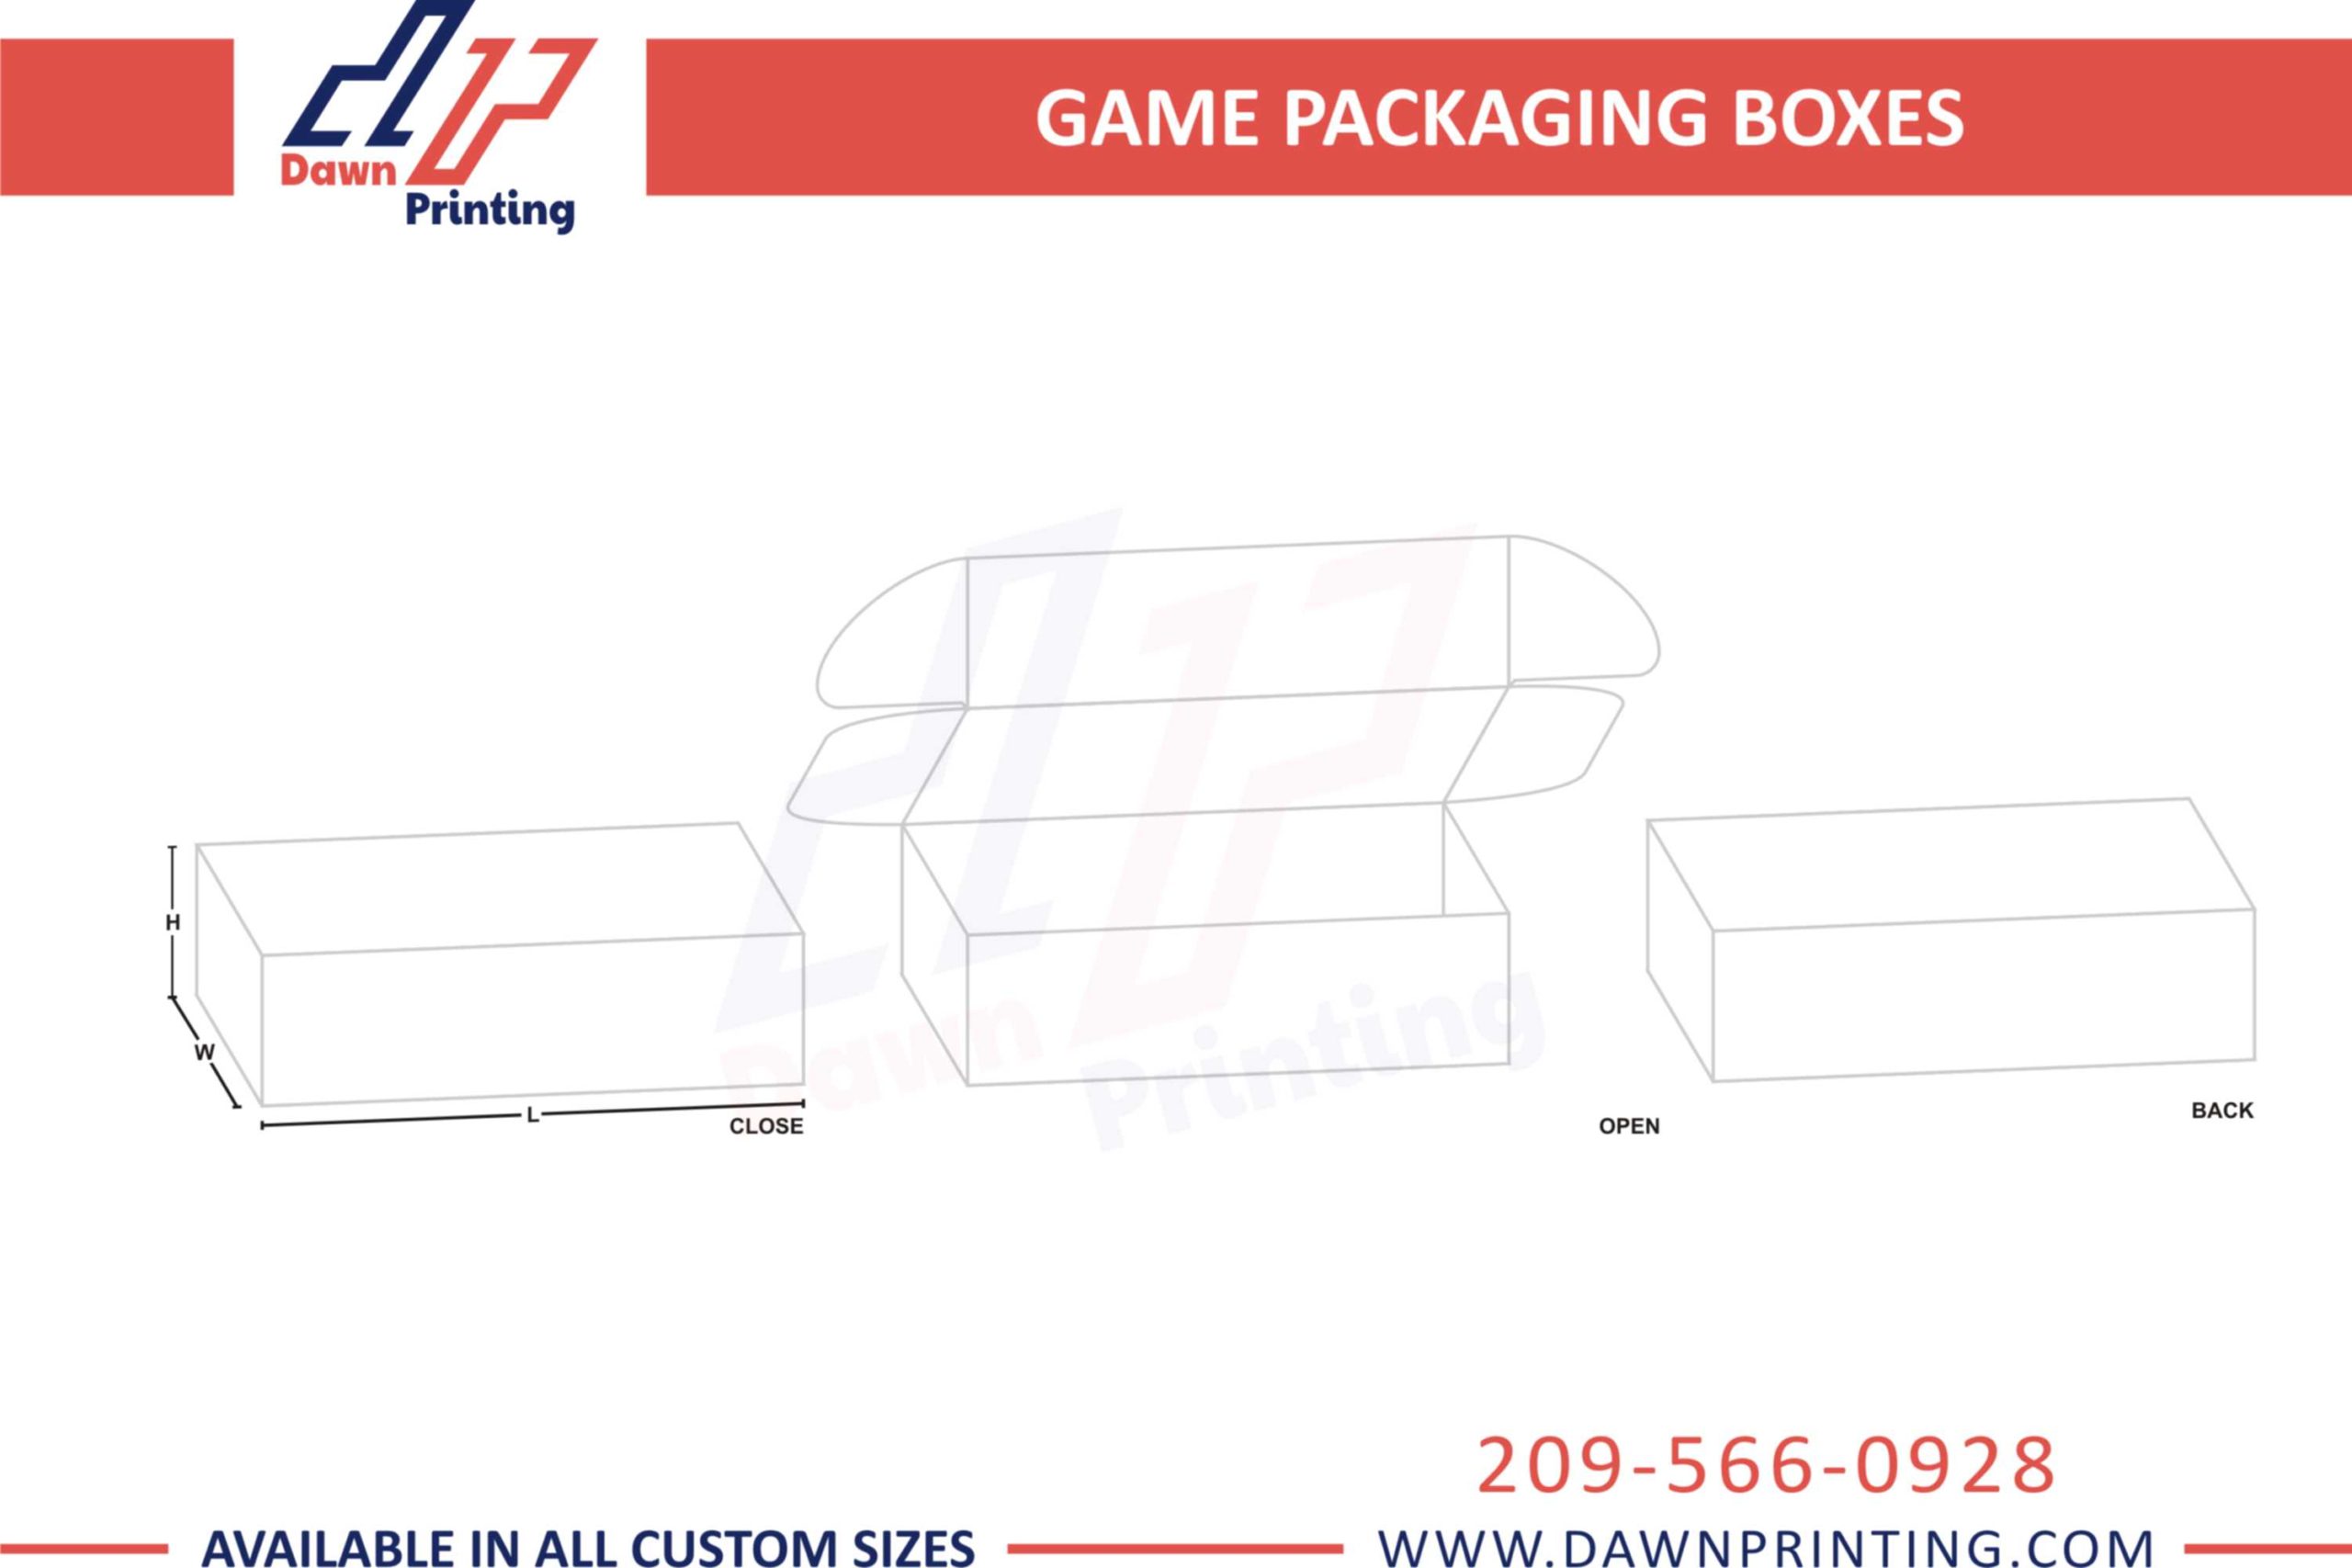 Game Packaging Template Boxes - Dawn Printing